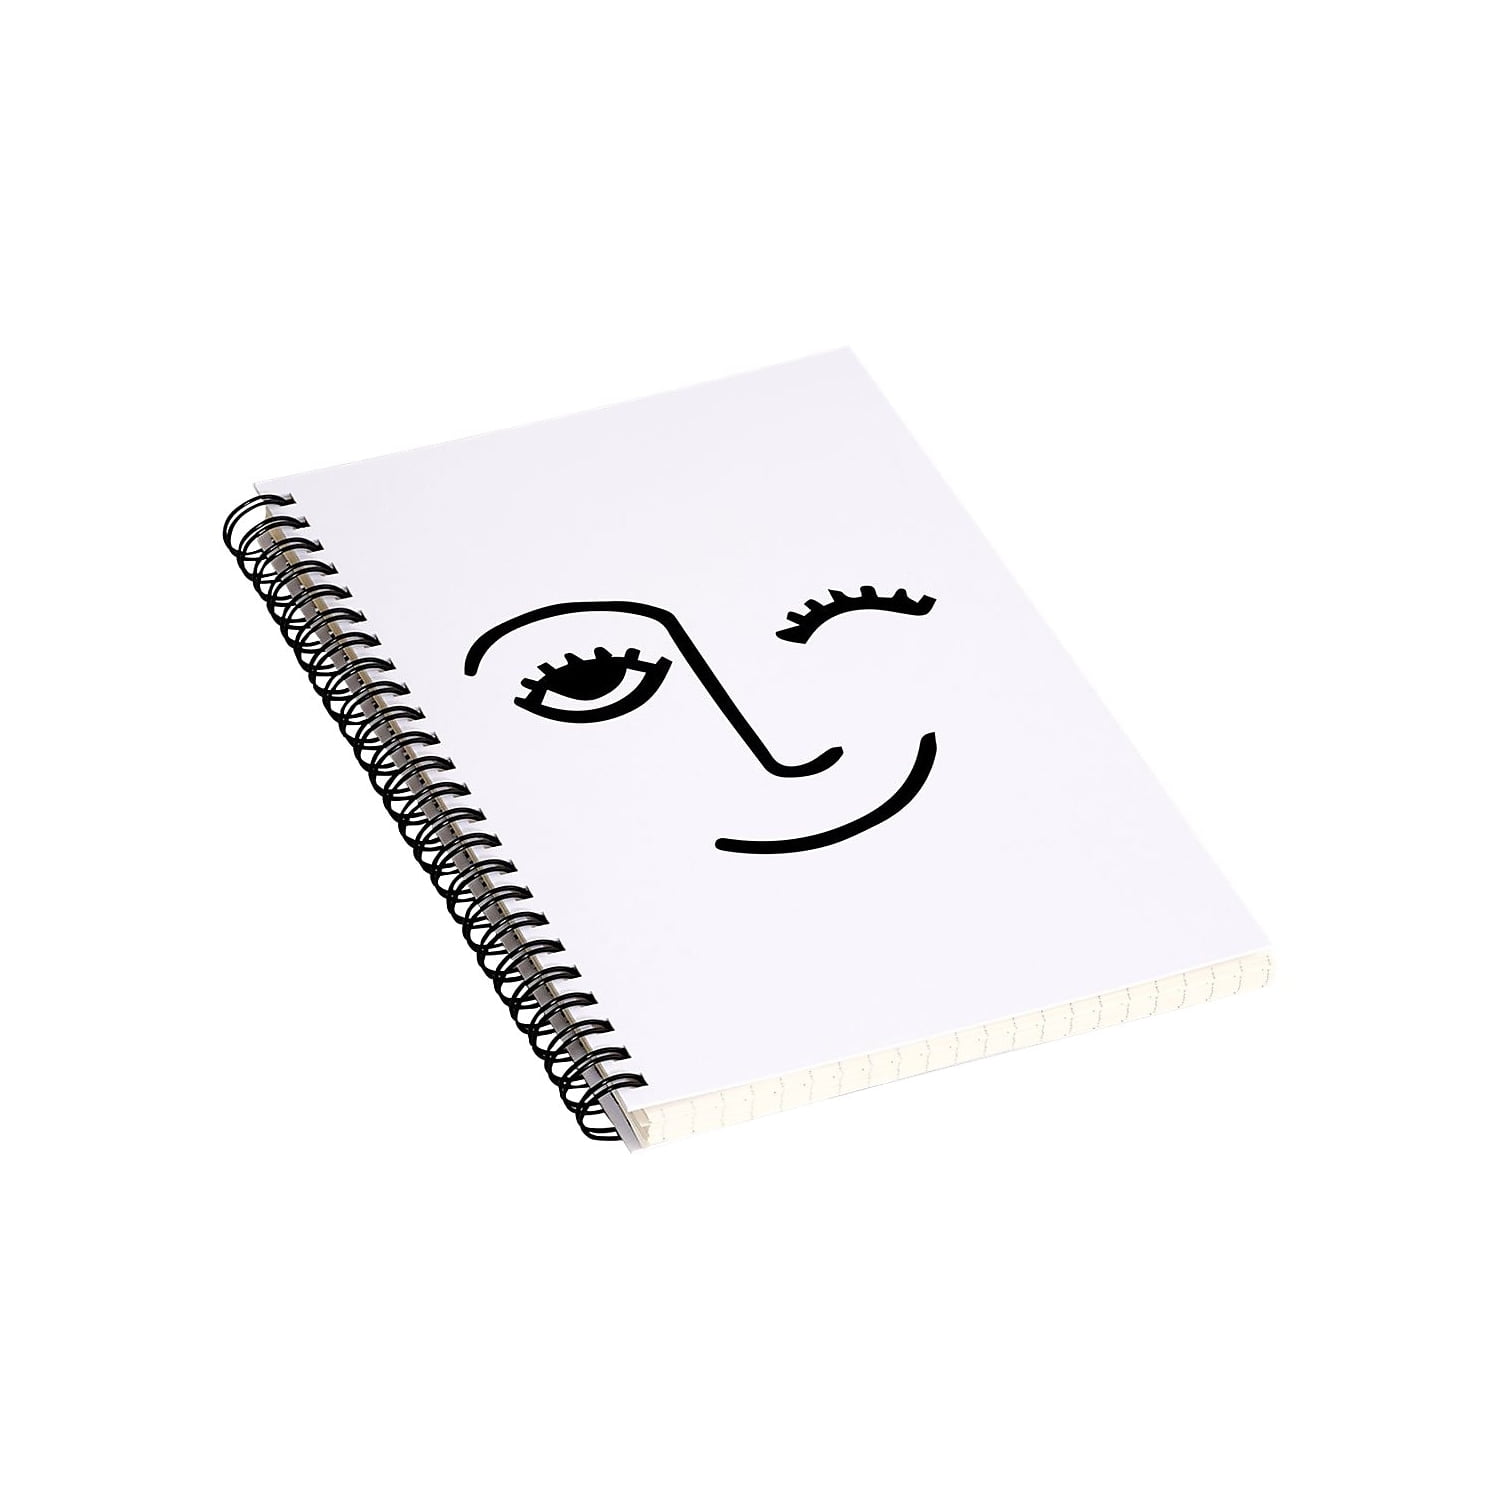 DENY Designs Wink Face by Mambo Art Studio Professional Notebooks 5.5 x  8.25 Dotted 40 Sheets 